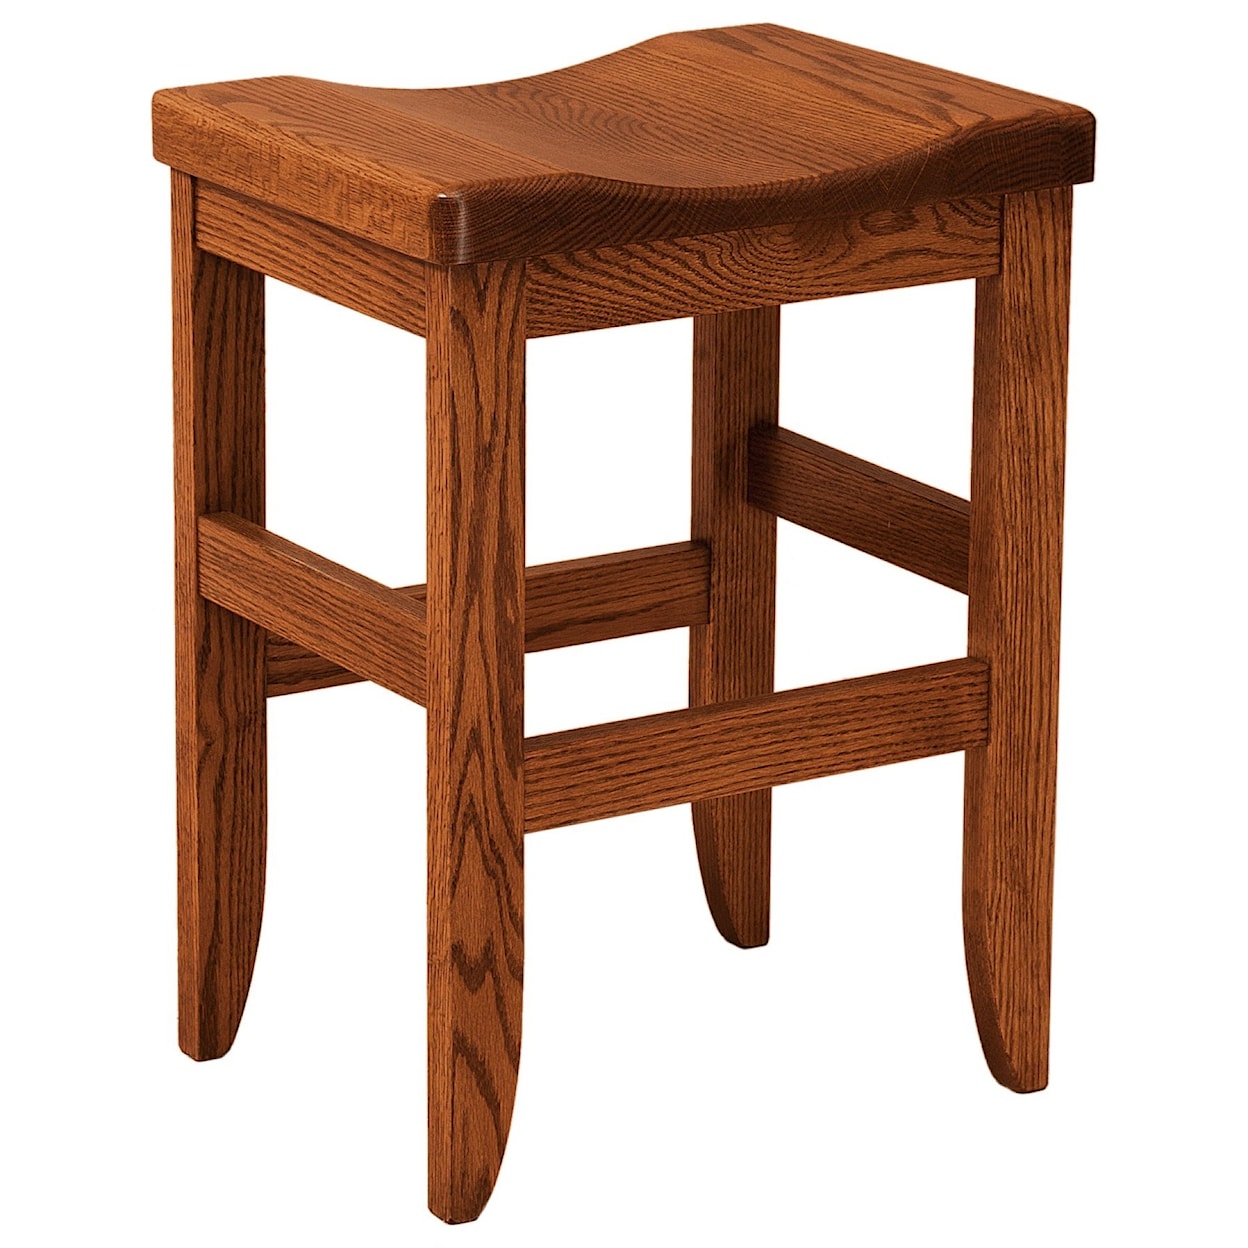 F&N Woodworking Clifton Bar Stool 24" Height - Leather Seat